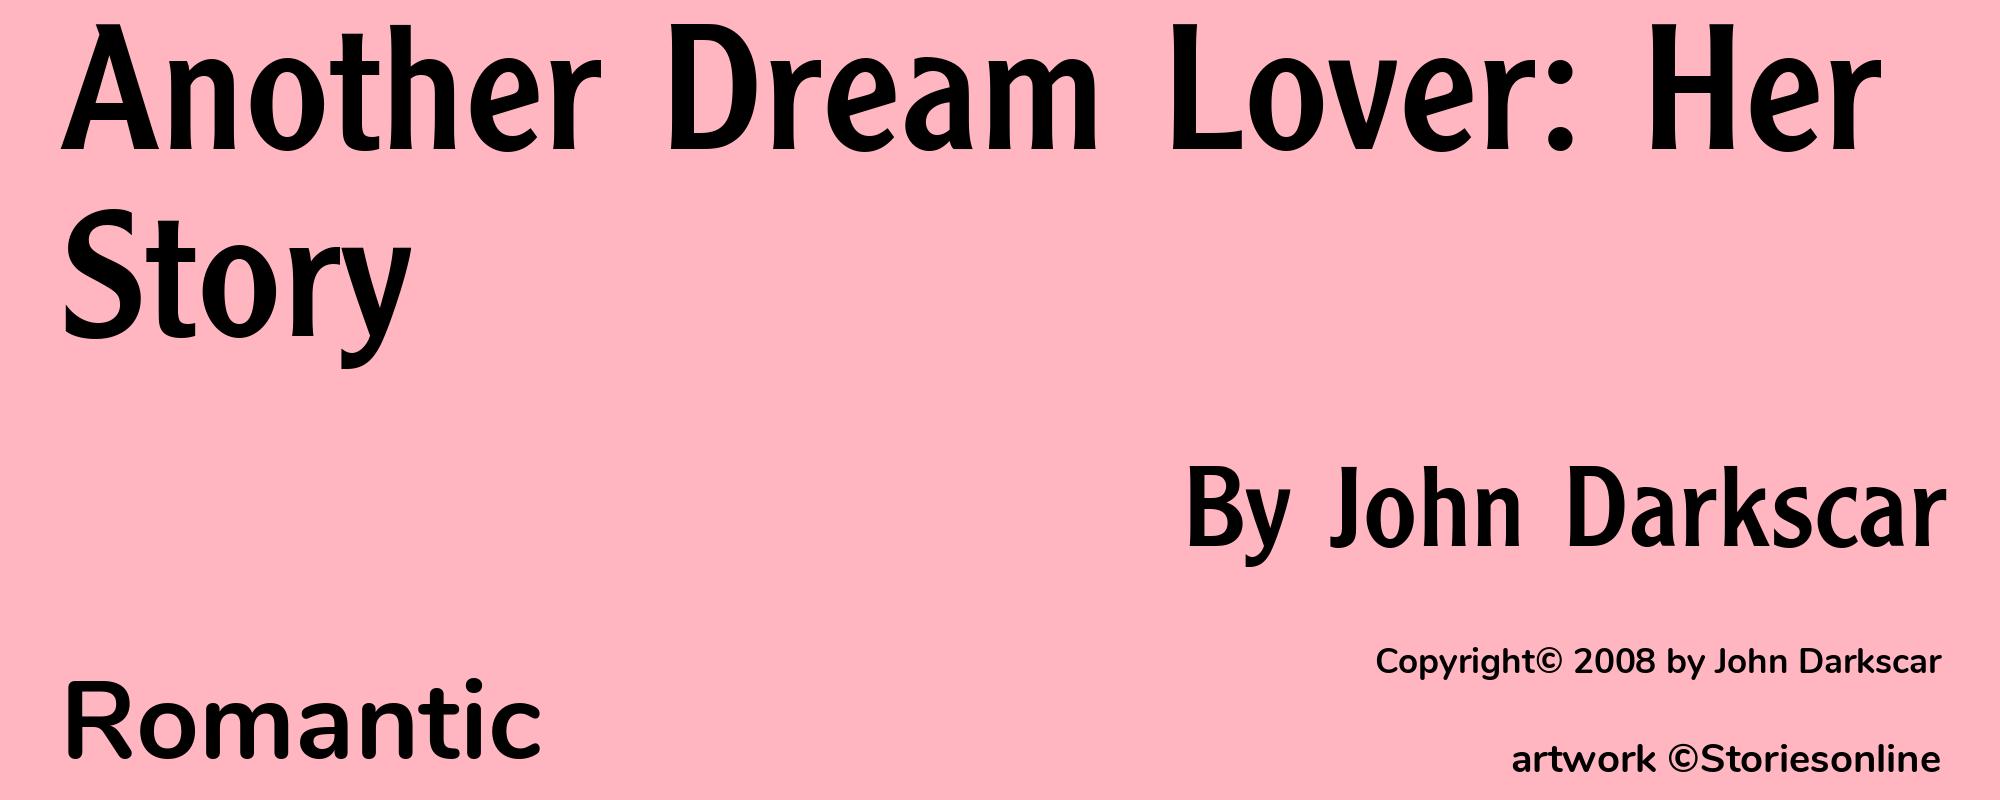 Another Dream Lover: Her Story - Cover